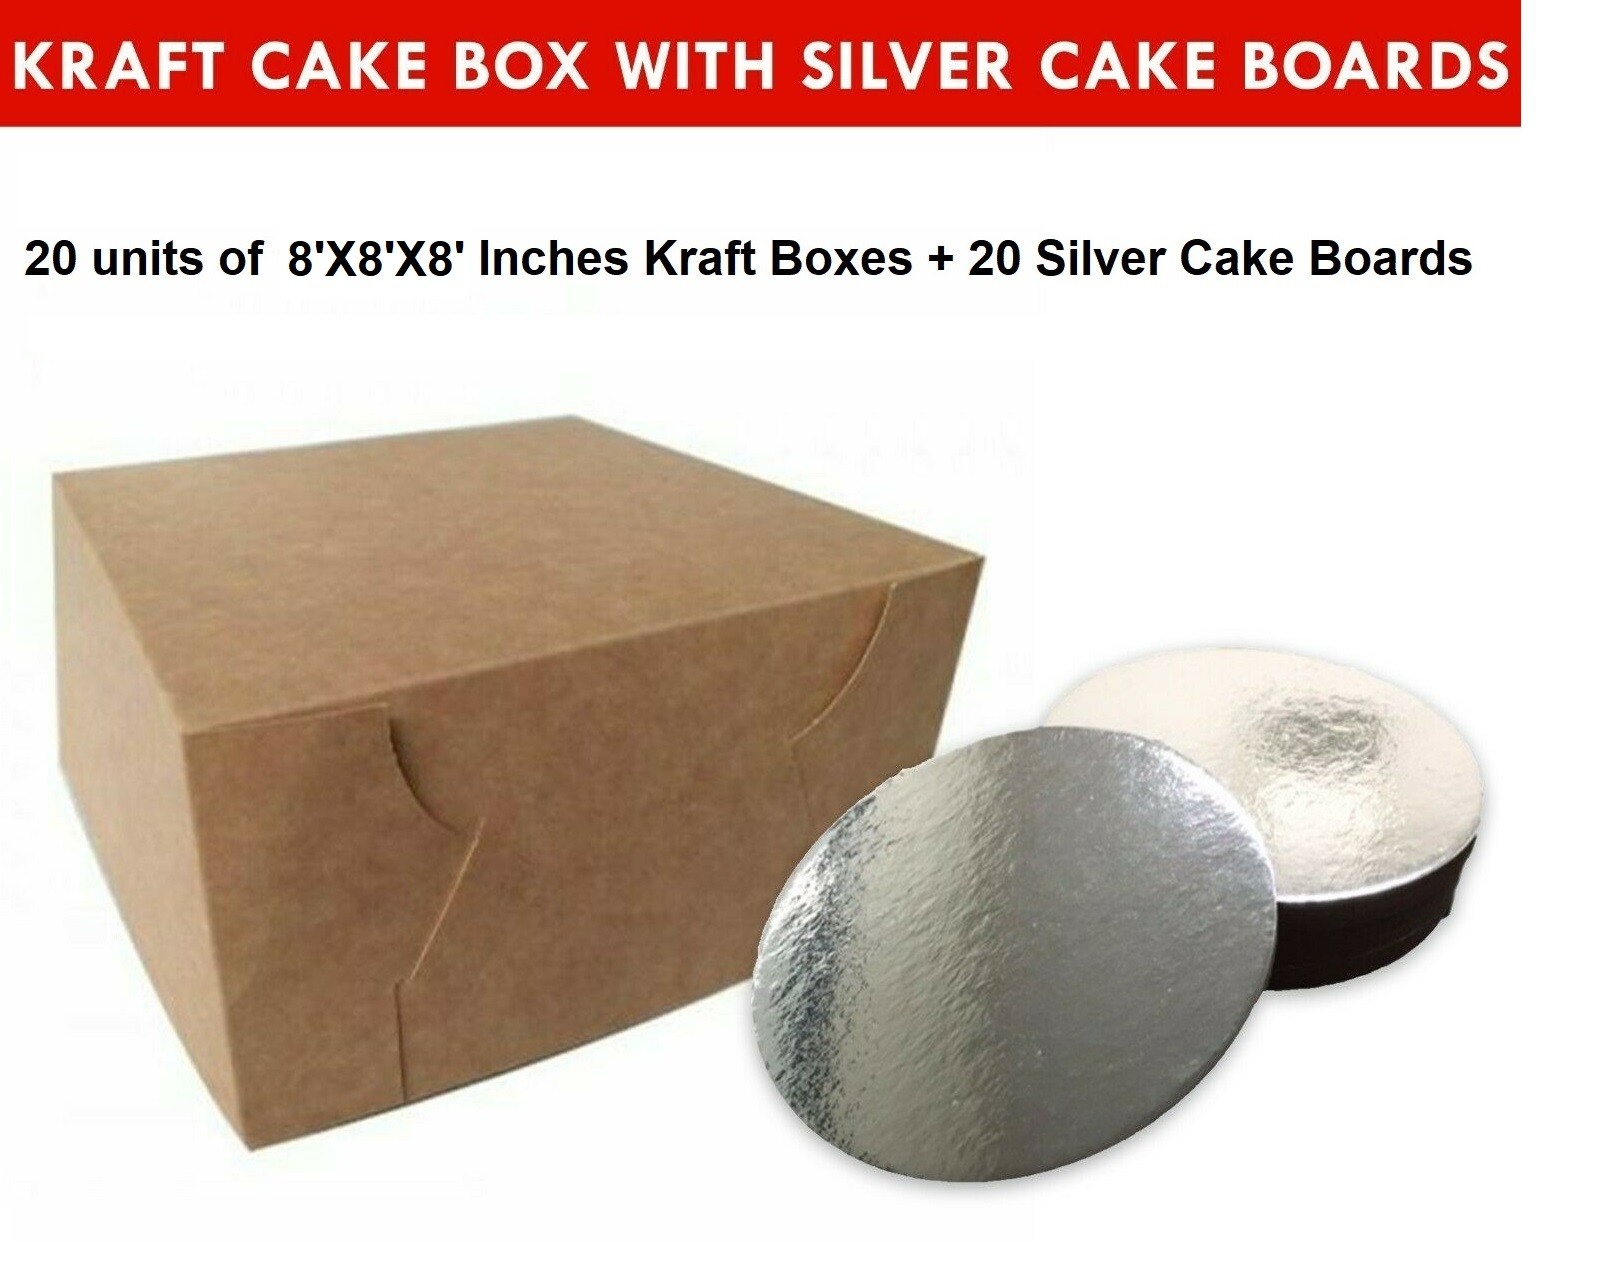 Kraft Cake Boxes with Round boards - 8" x 8" x 4" ($3.6 /pc x 20 units)